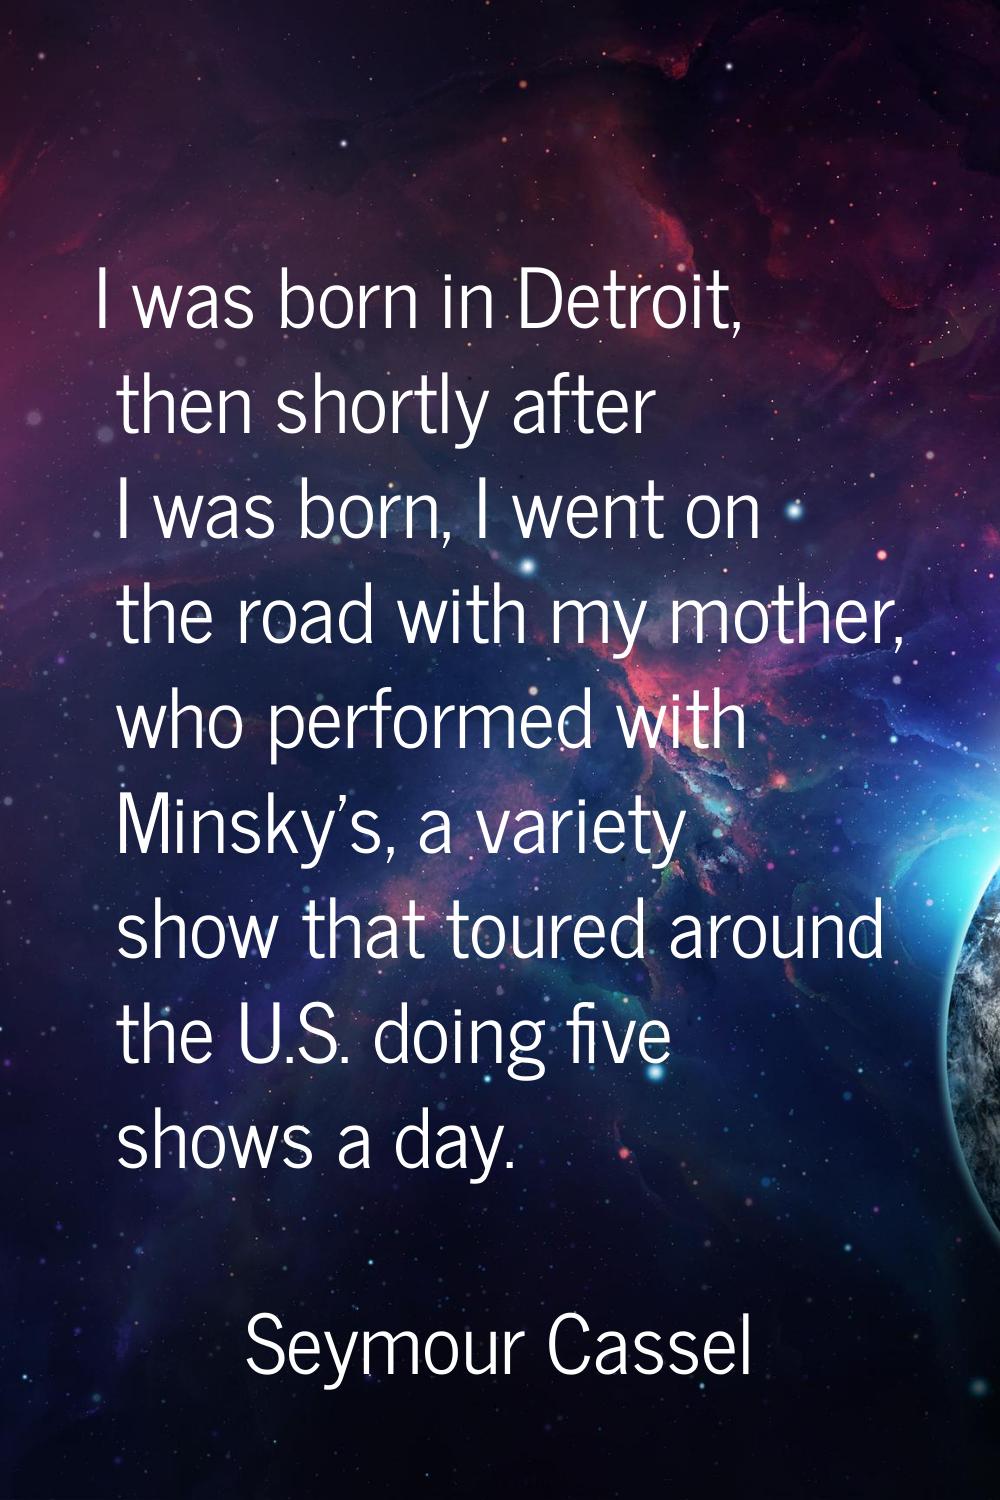 I was born in Detroit, then shortly after I was born, I went on the road with my mother, who perfor